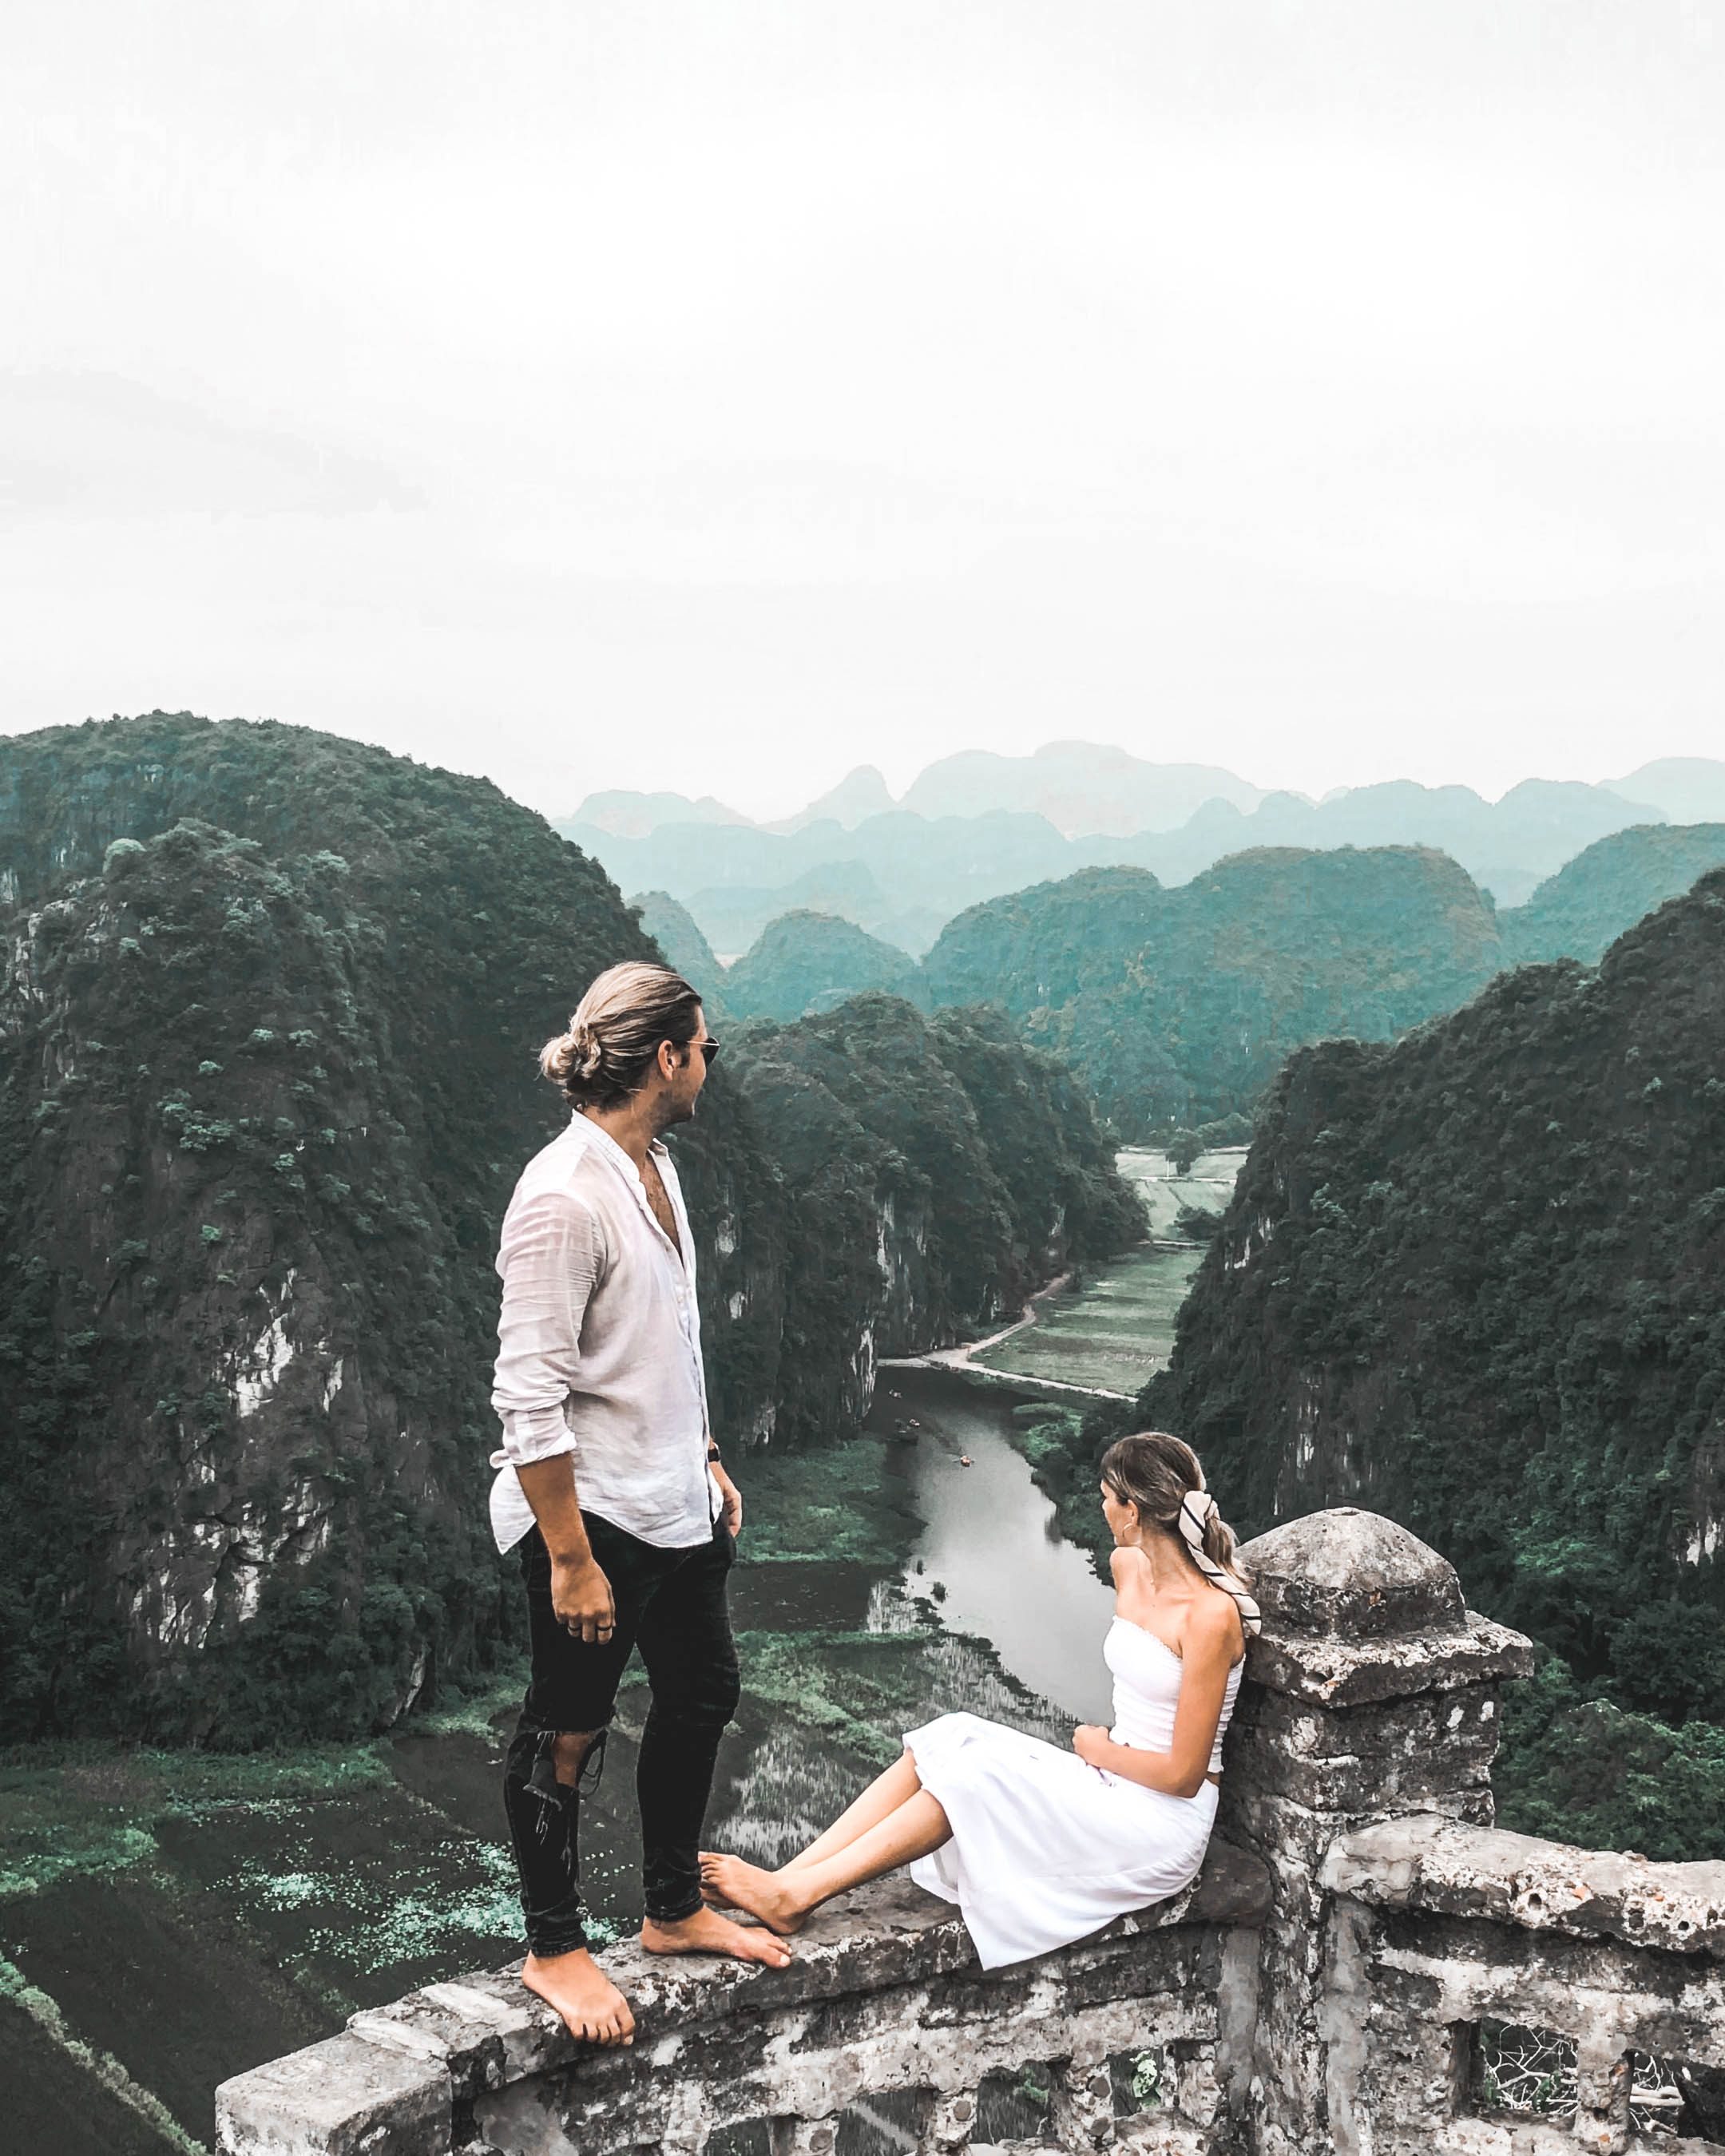 The view from Mua cave hike in Ninh Binh